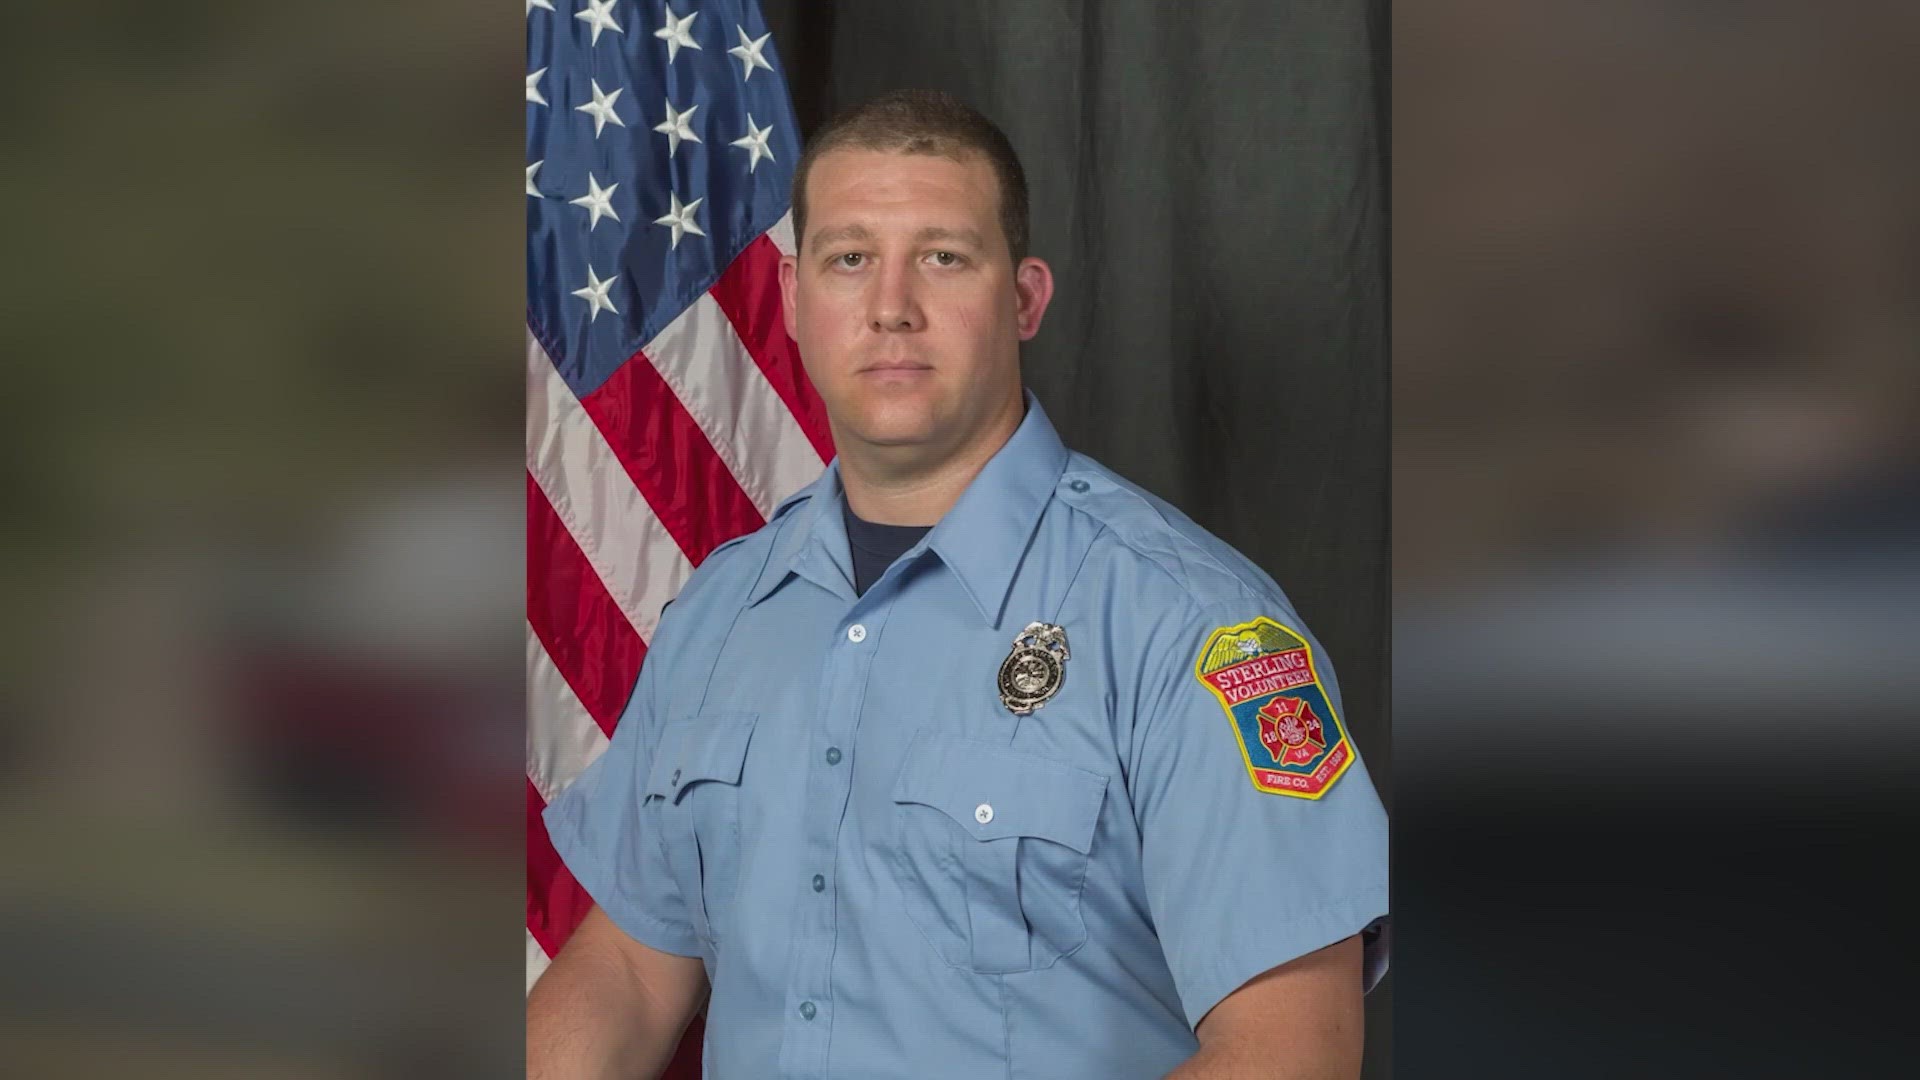 A firefighter was killed when a Sterling house exploded Friday, and now, as the community bands together to remember him, funeral arrangements have been announced.